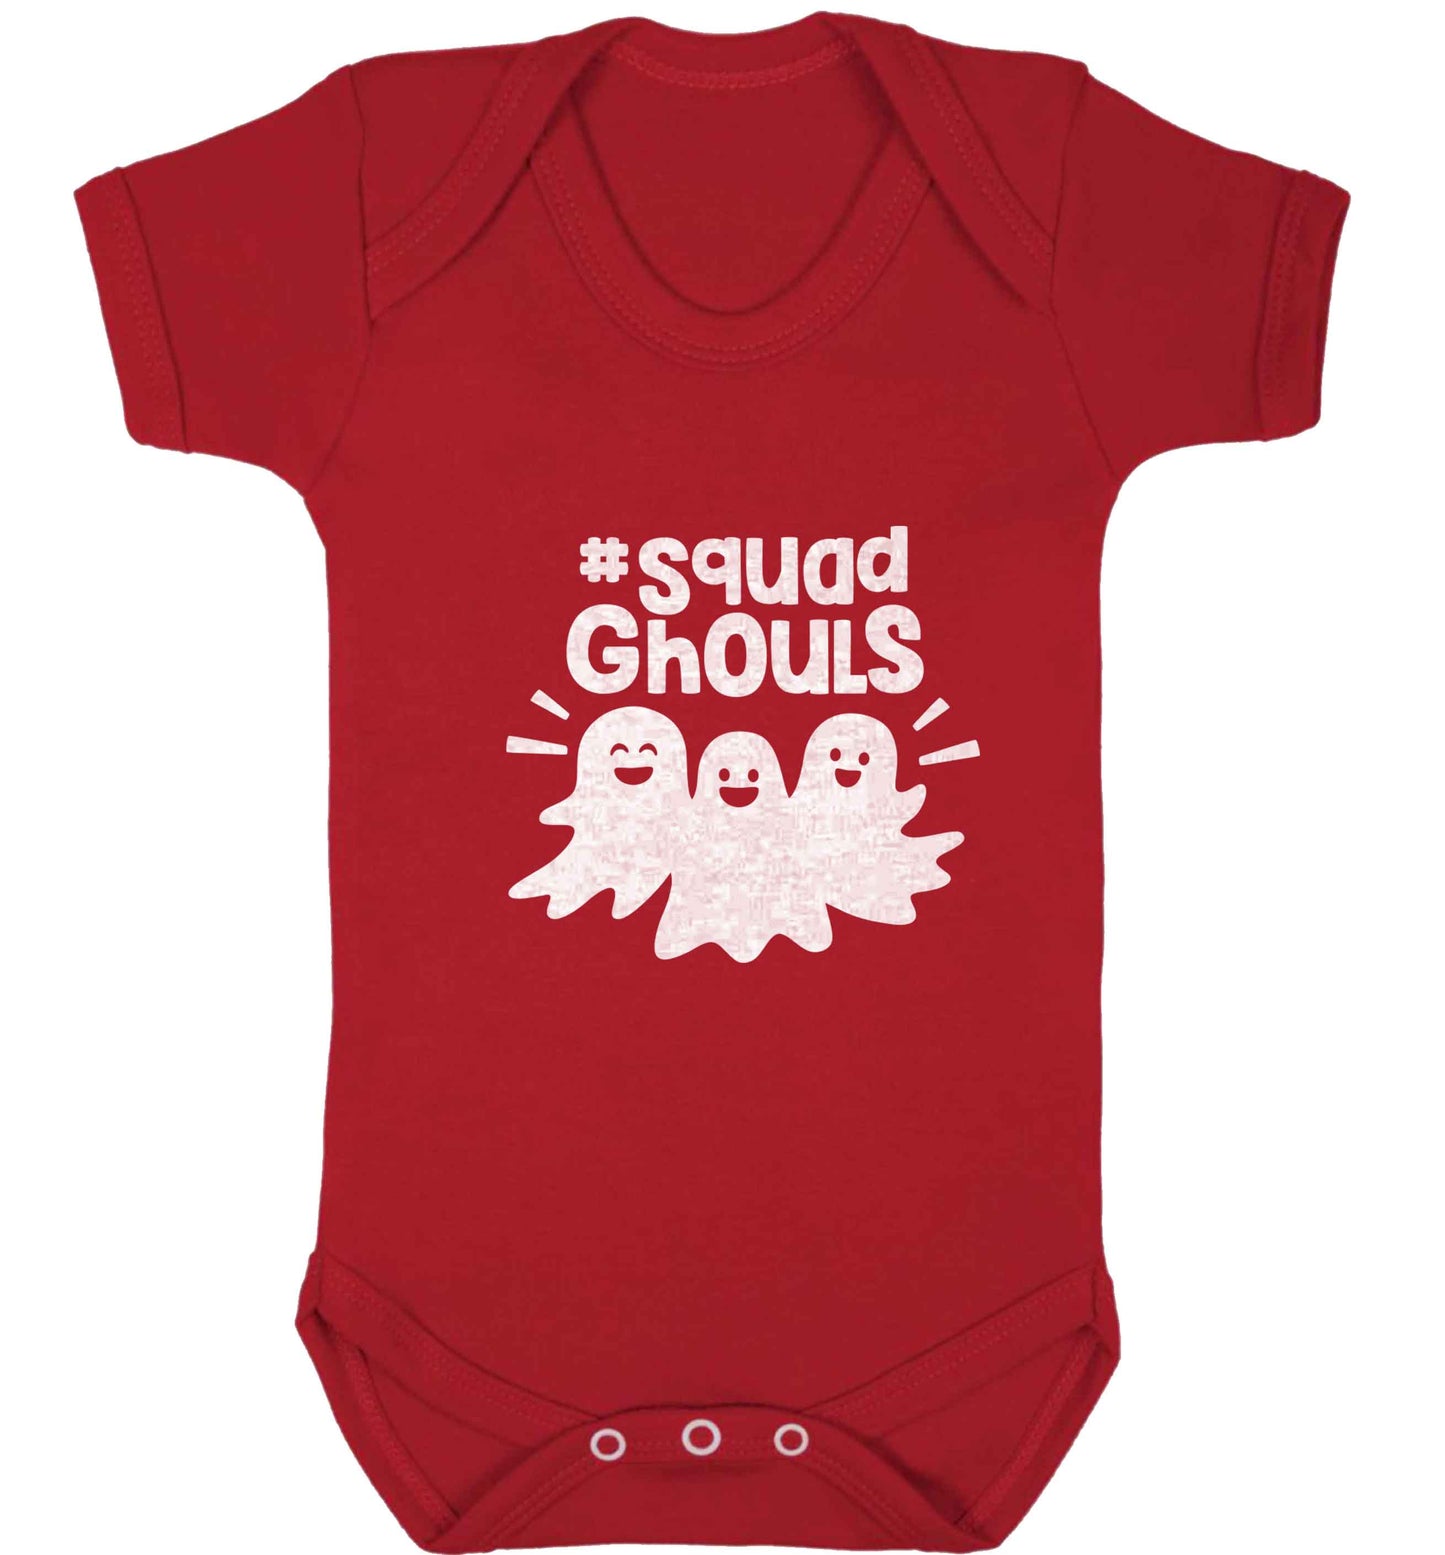 Squad ghouls Kit baby vest red 18-24 months